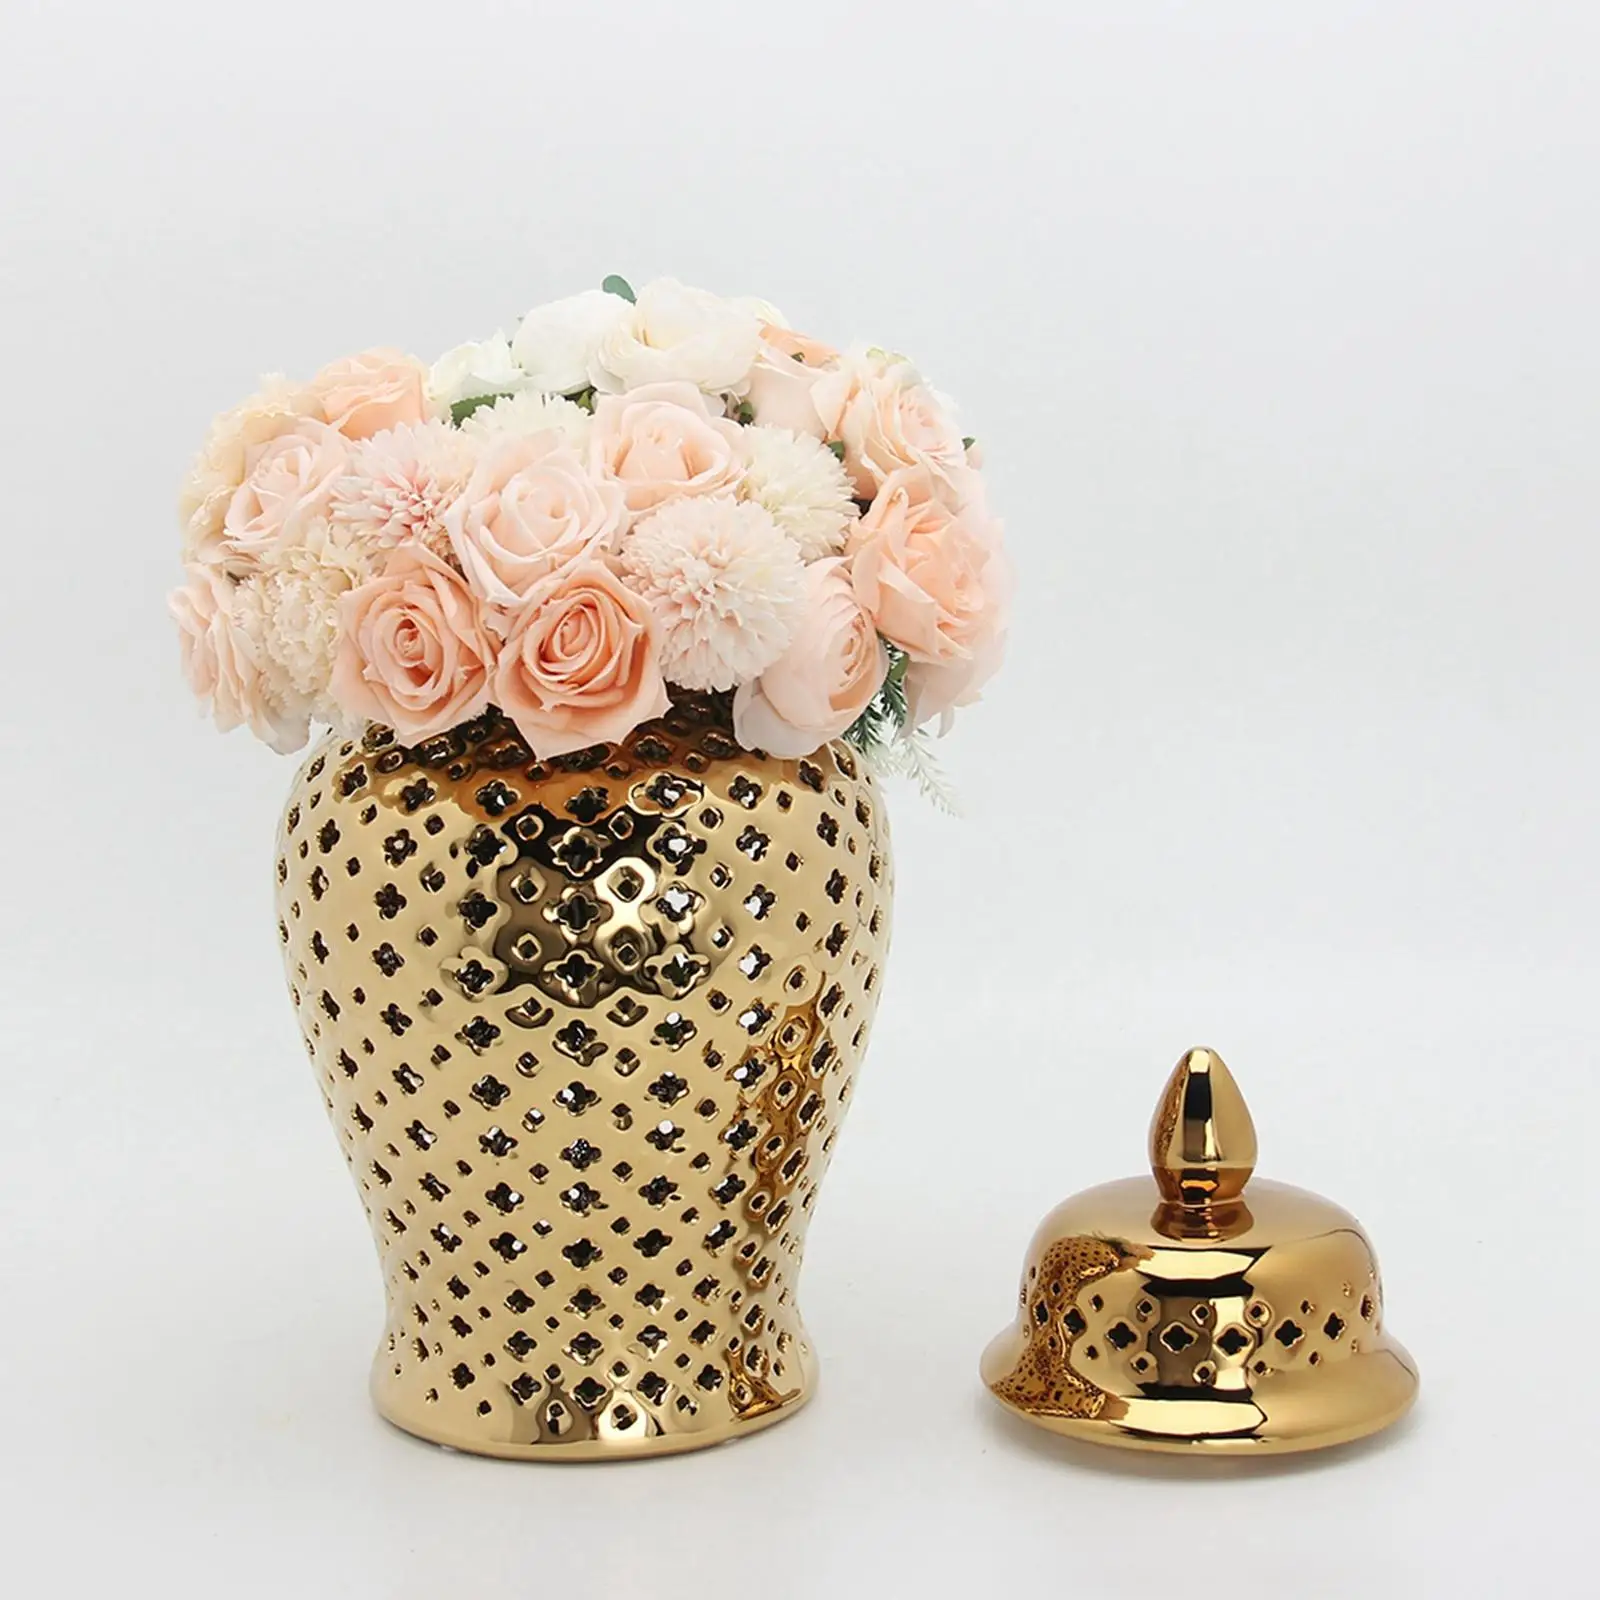 Ceramic Ginger Jar Oriental Handicraft Lattice Universal Pierced Gold Collectable for Parties Wedding Home Decoration Gift Cafe